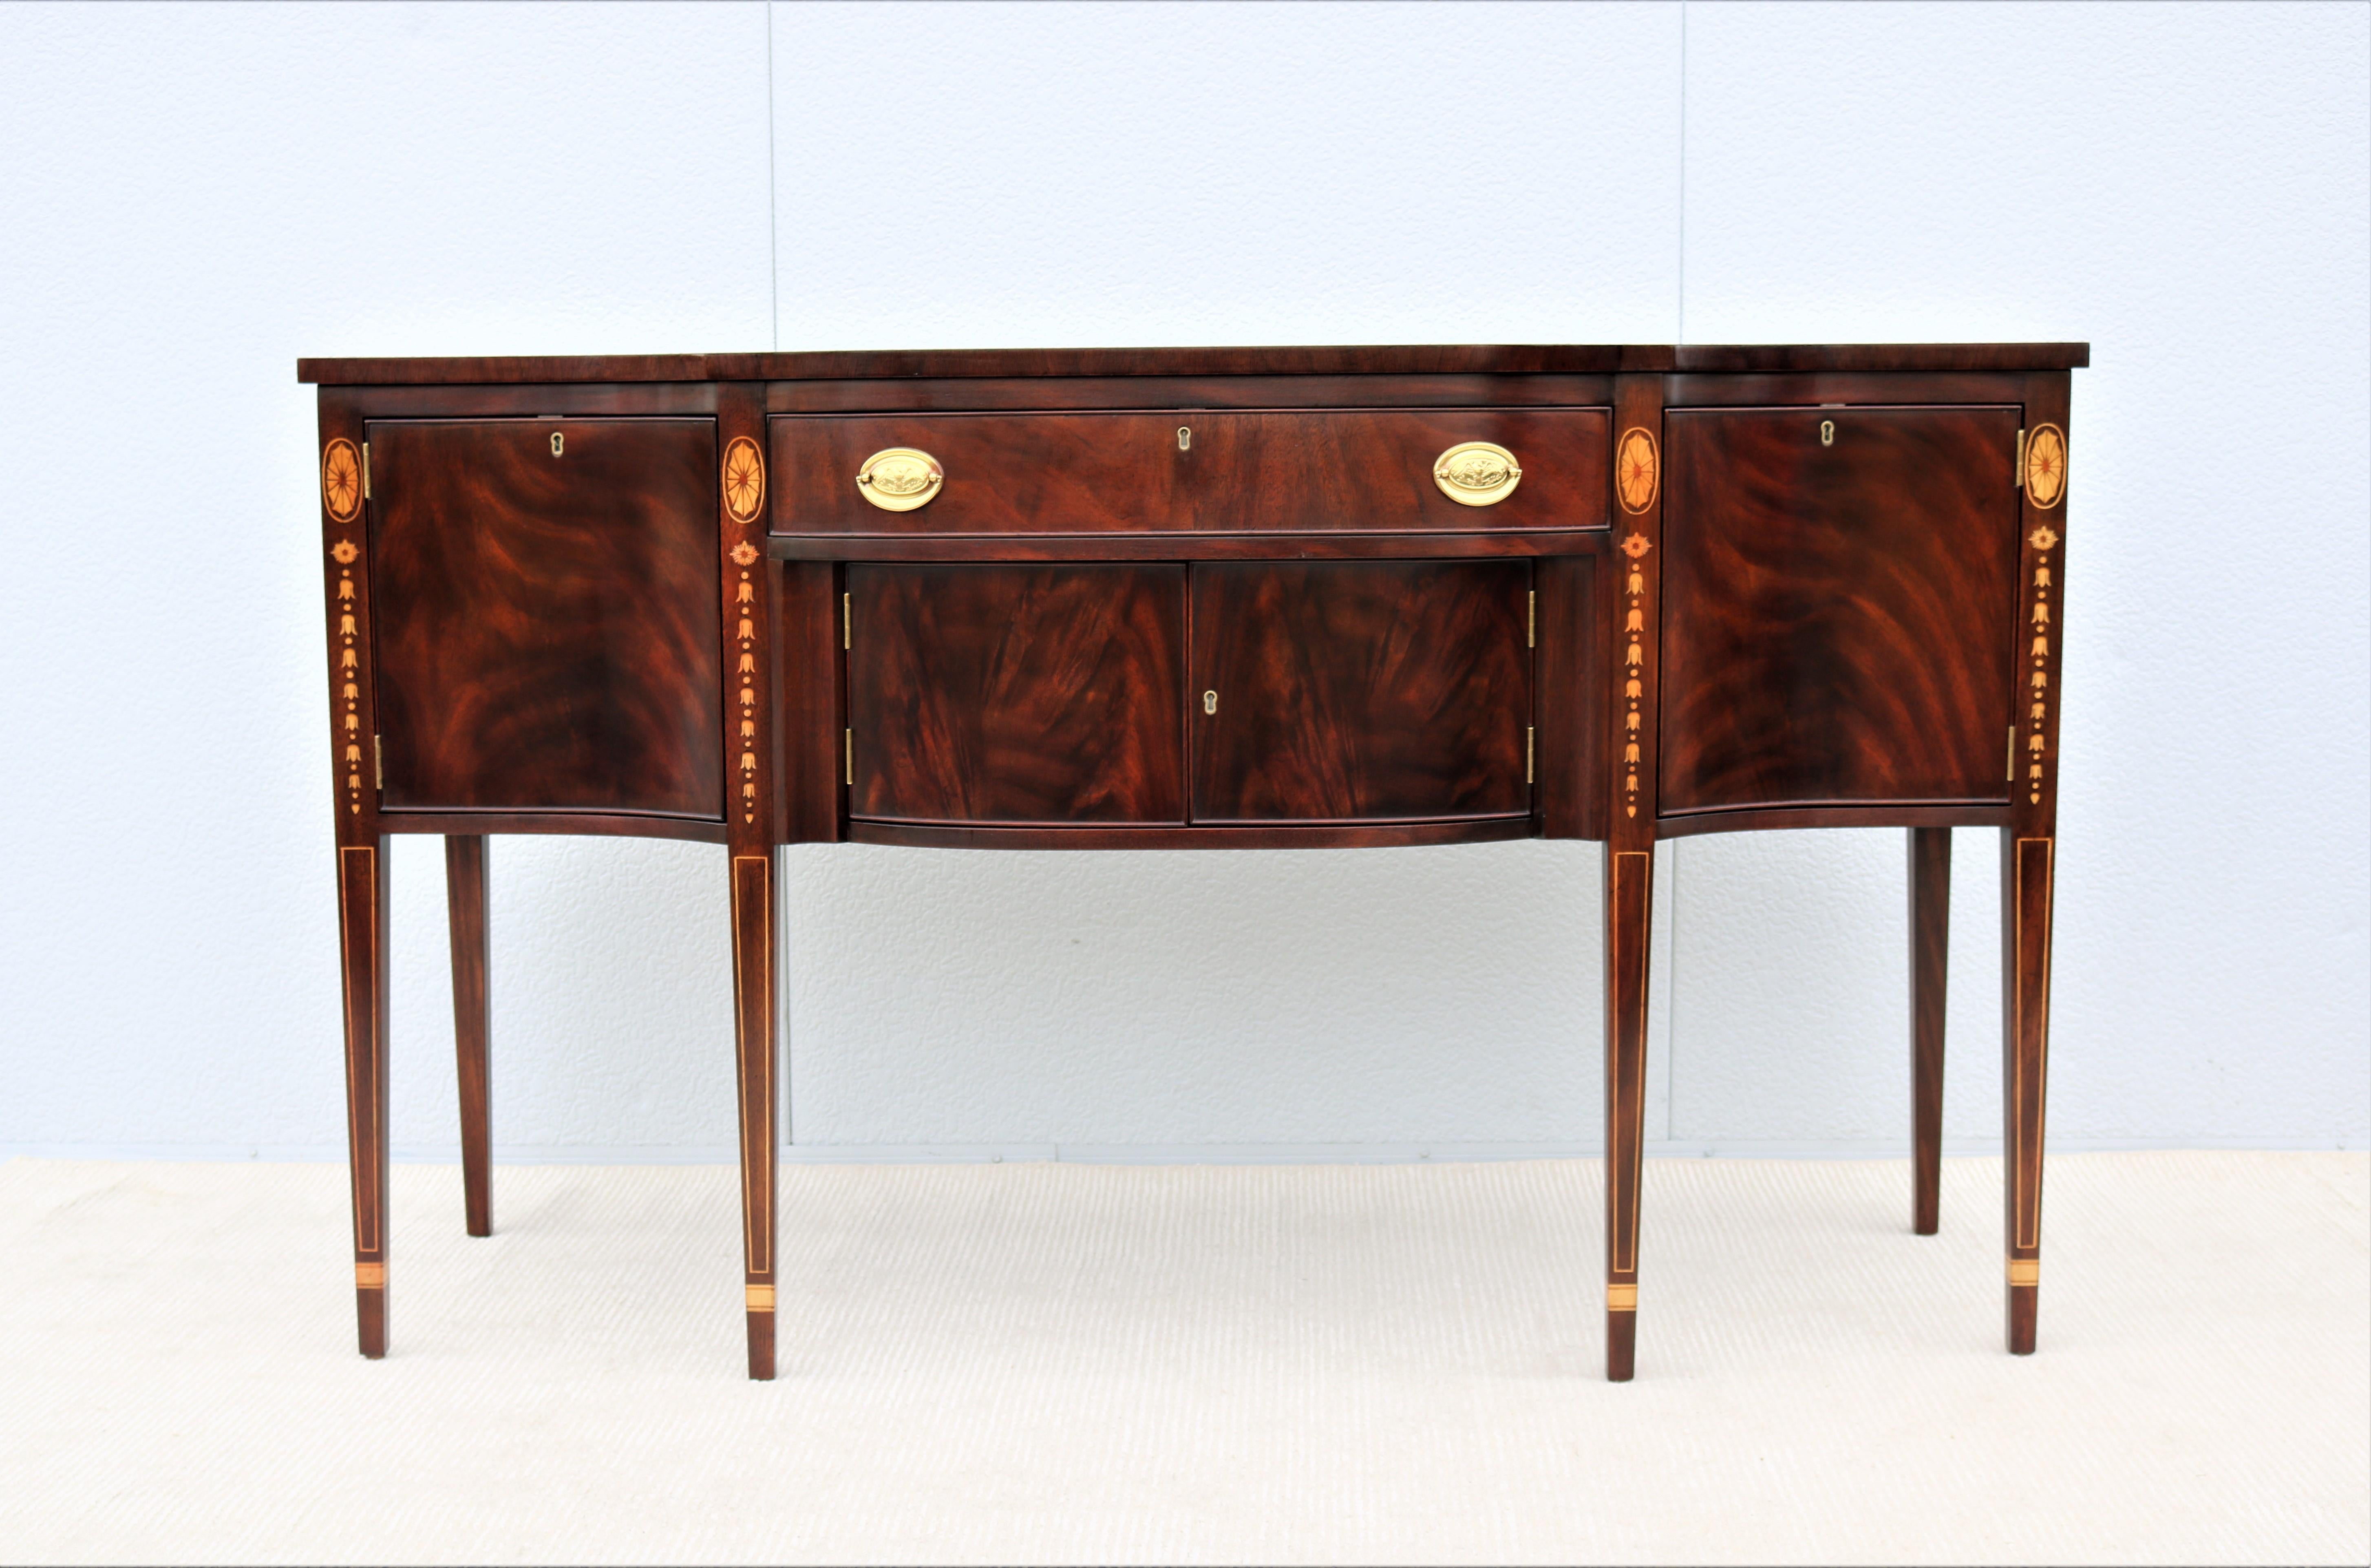 Fabulous vintage traditional Sheraton style mahogany sideboard cabinet.
A classic timeless and luxurious style inspired by the 18th and 19th century design.
The Kittinger furniture company produces the world's finest handcrafted furniture with the